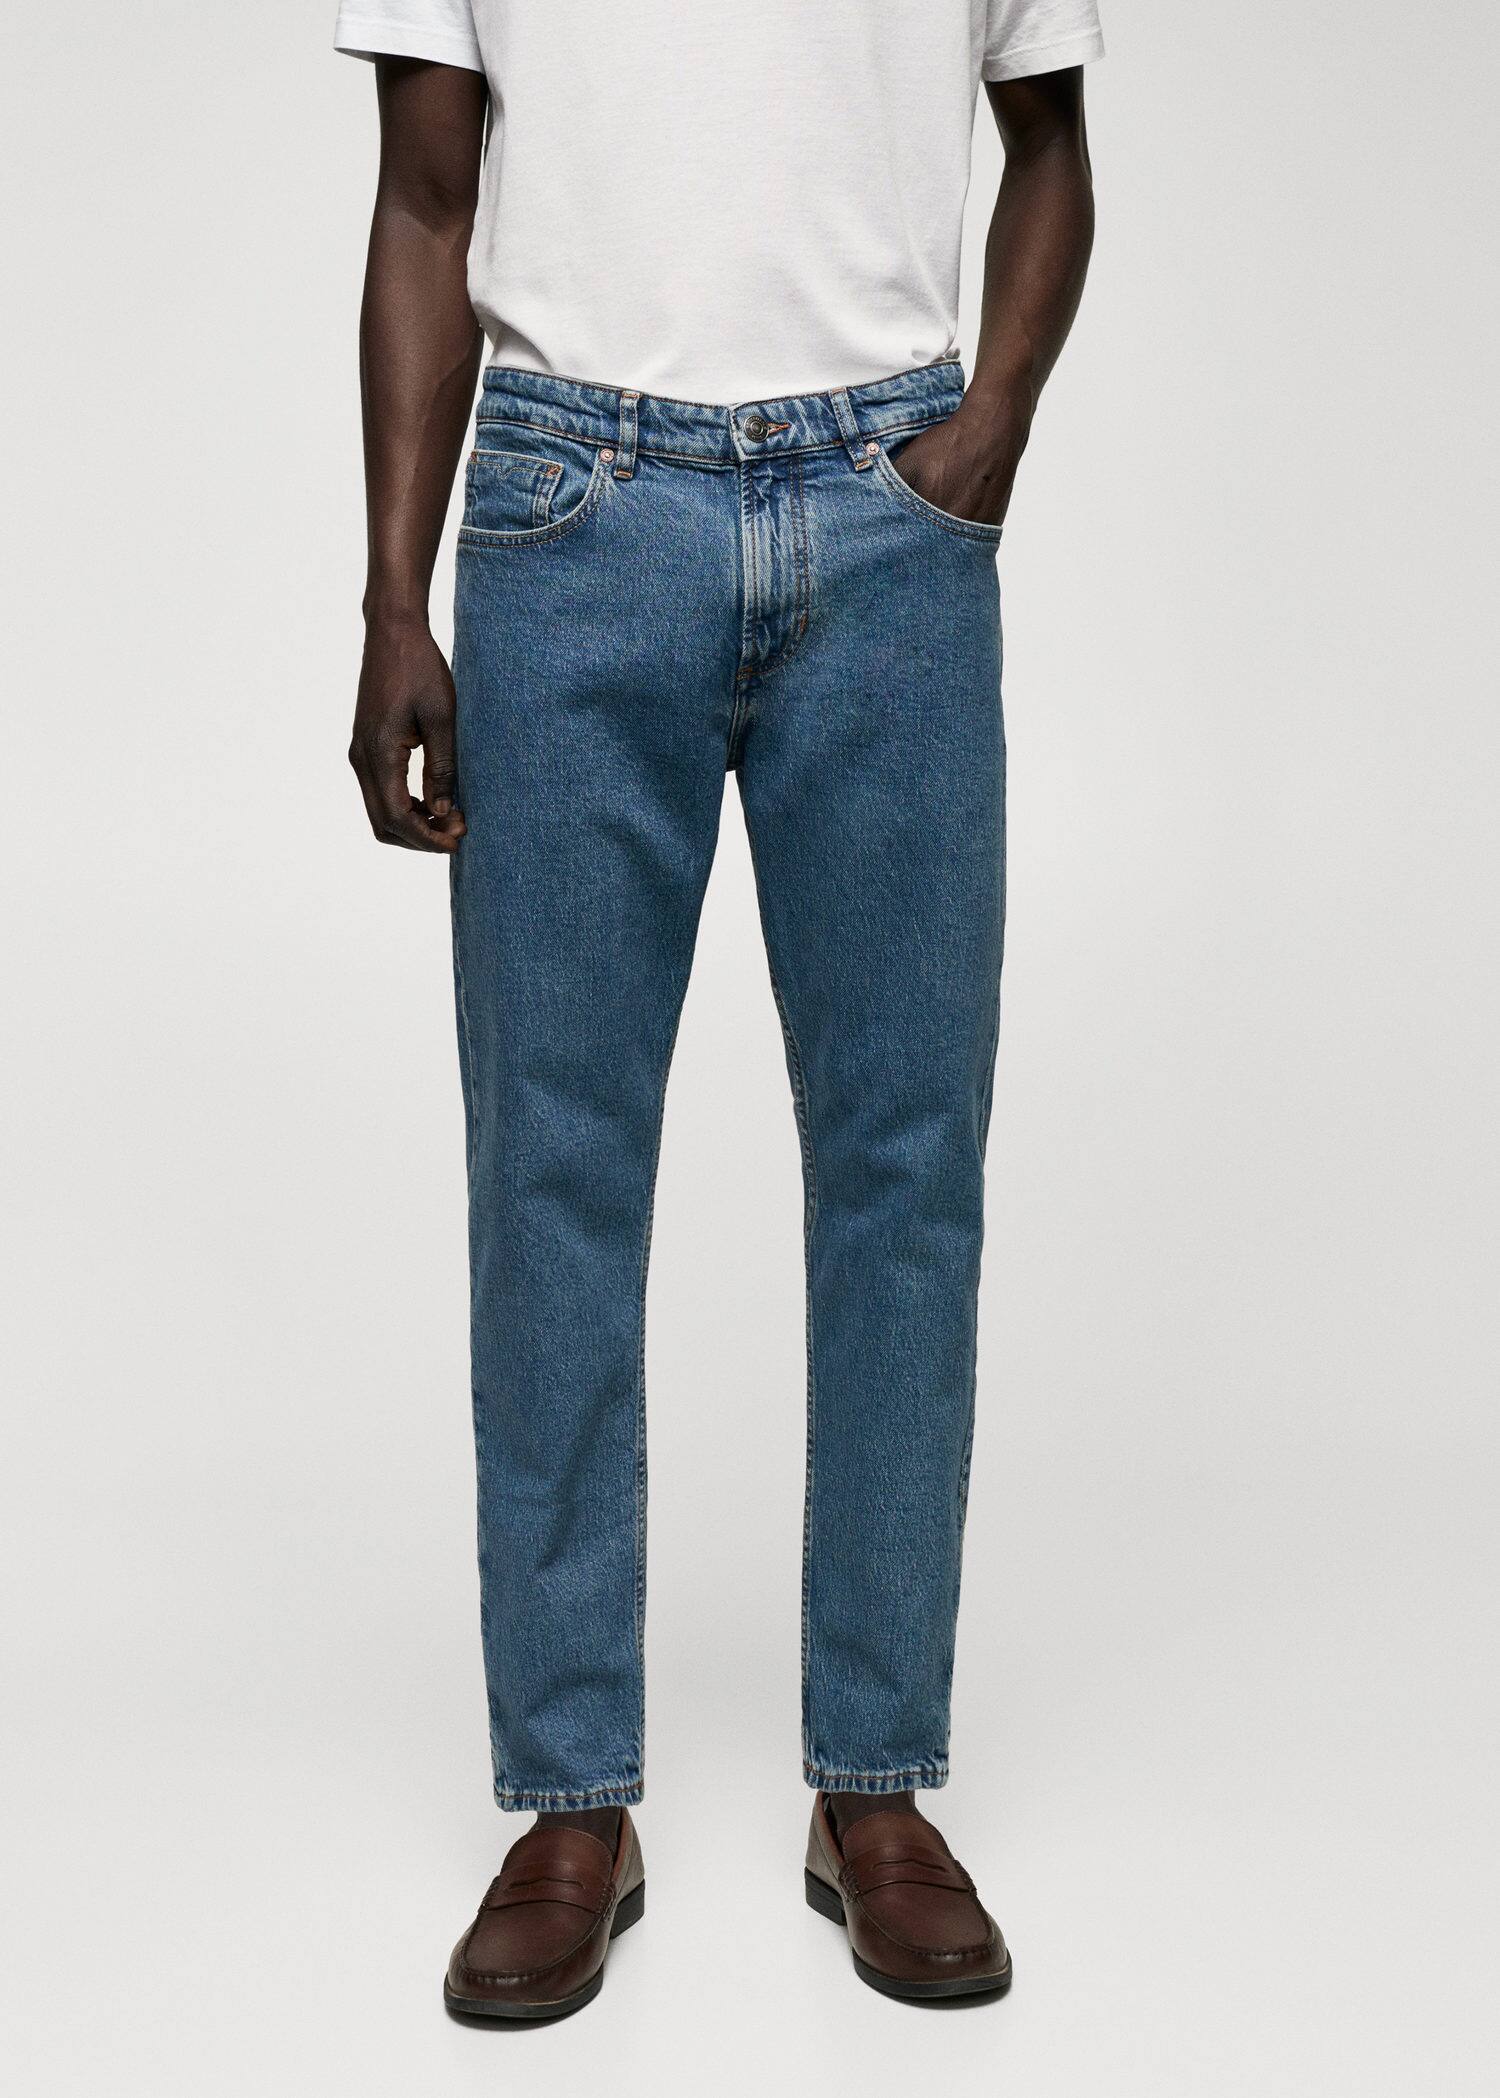 Texans Ben tapered cropped - Plano medio